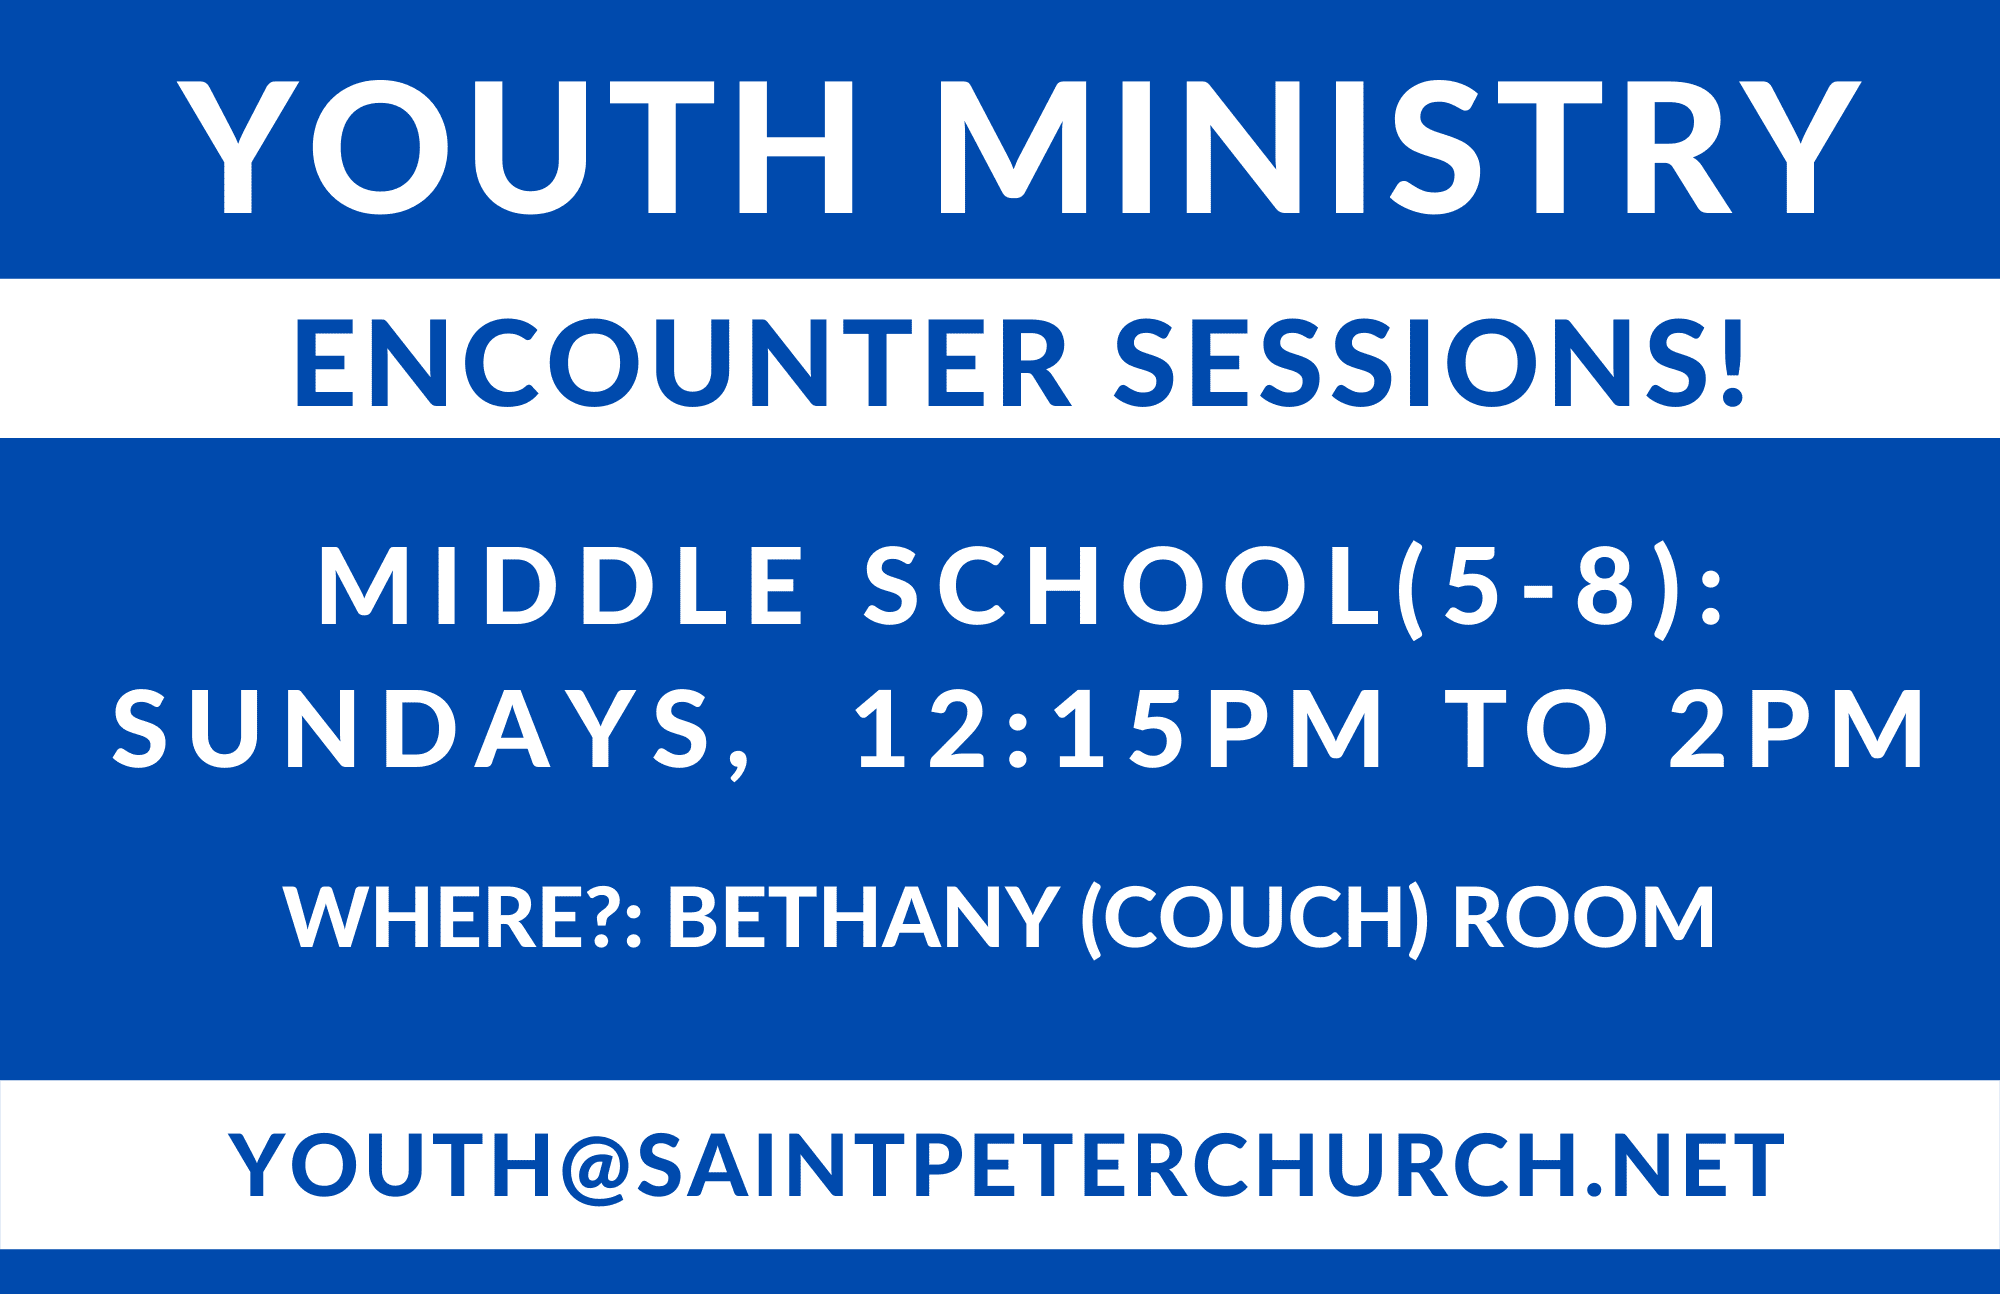 Middle School Encounter Sessions!